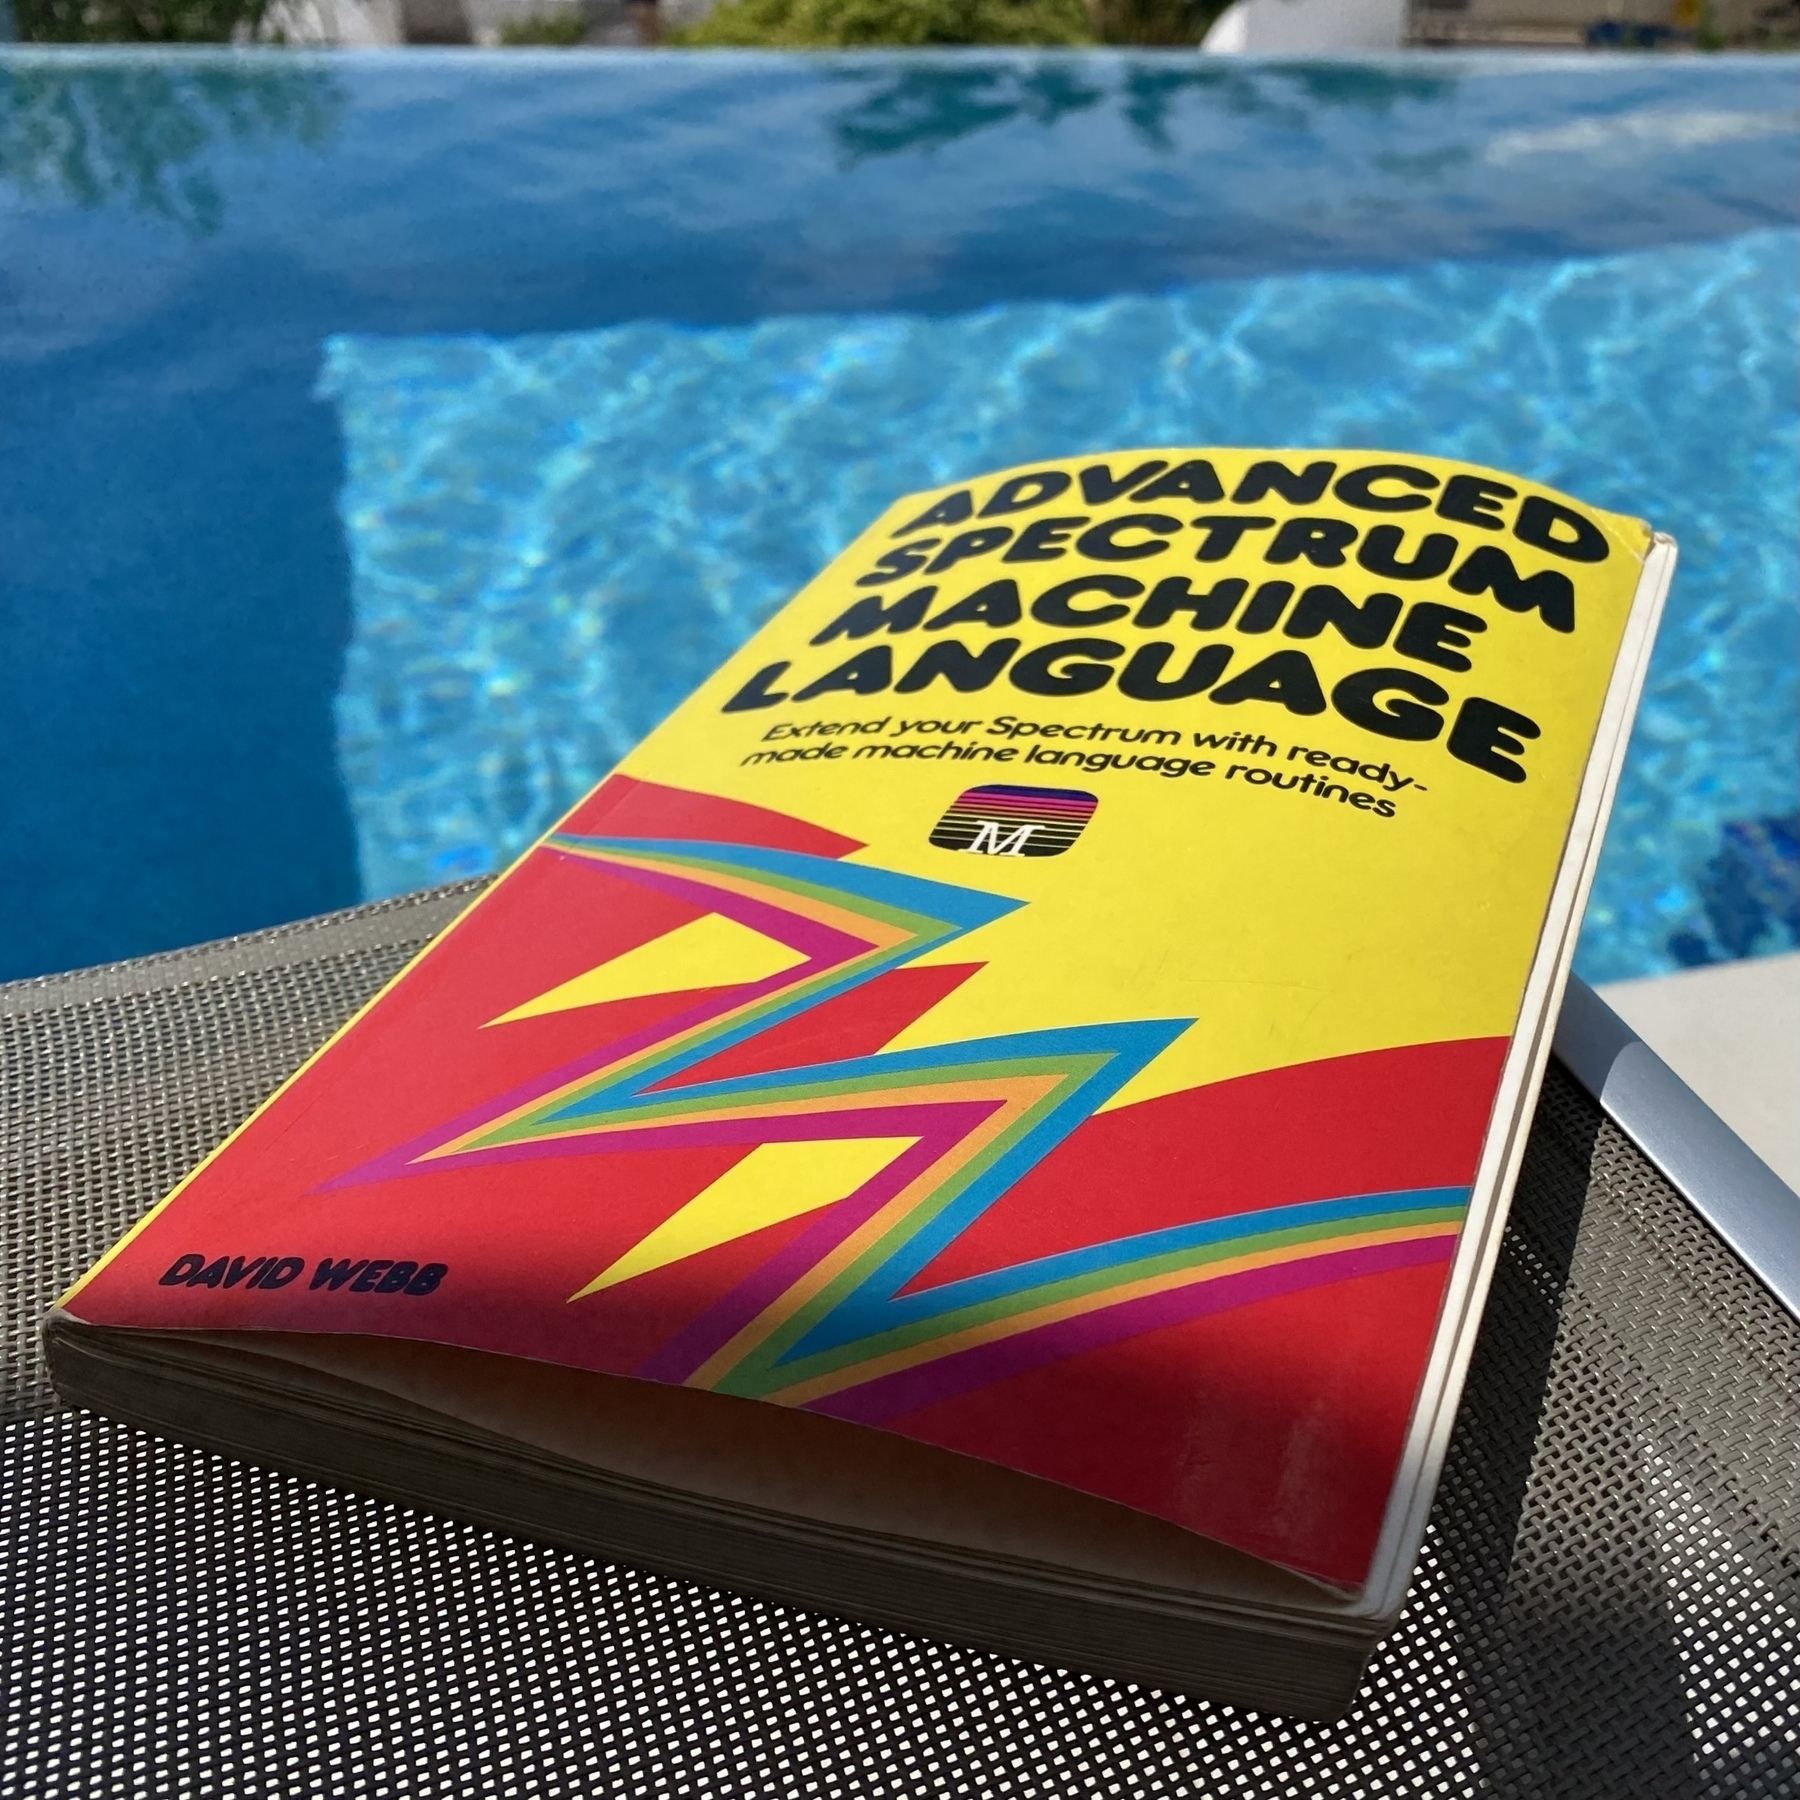 Paperback book in the sunshine by a swimming pool. The title is Advanced Spectrum Machine Language, by David Web.